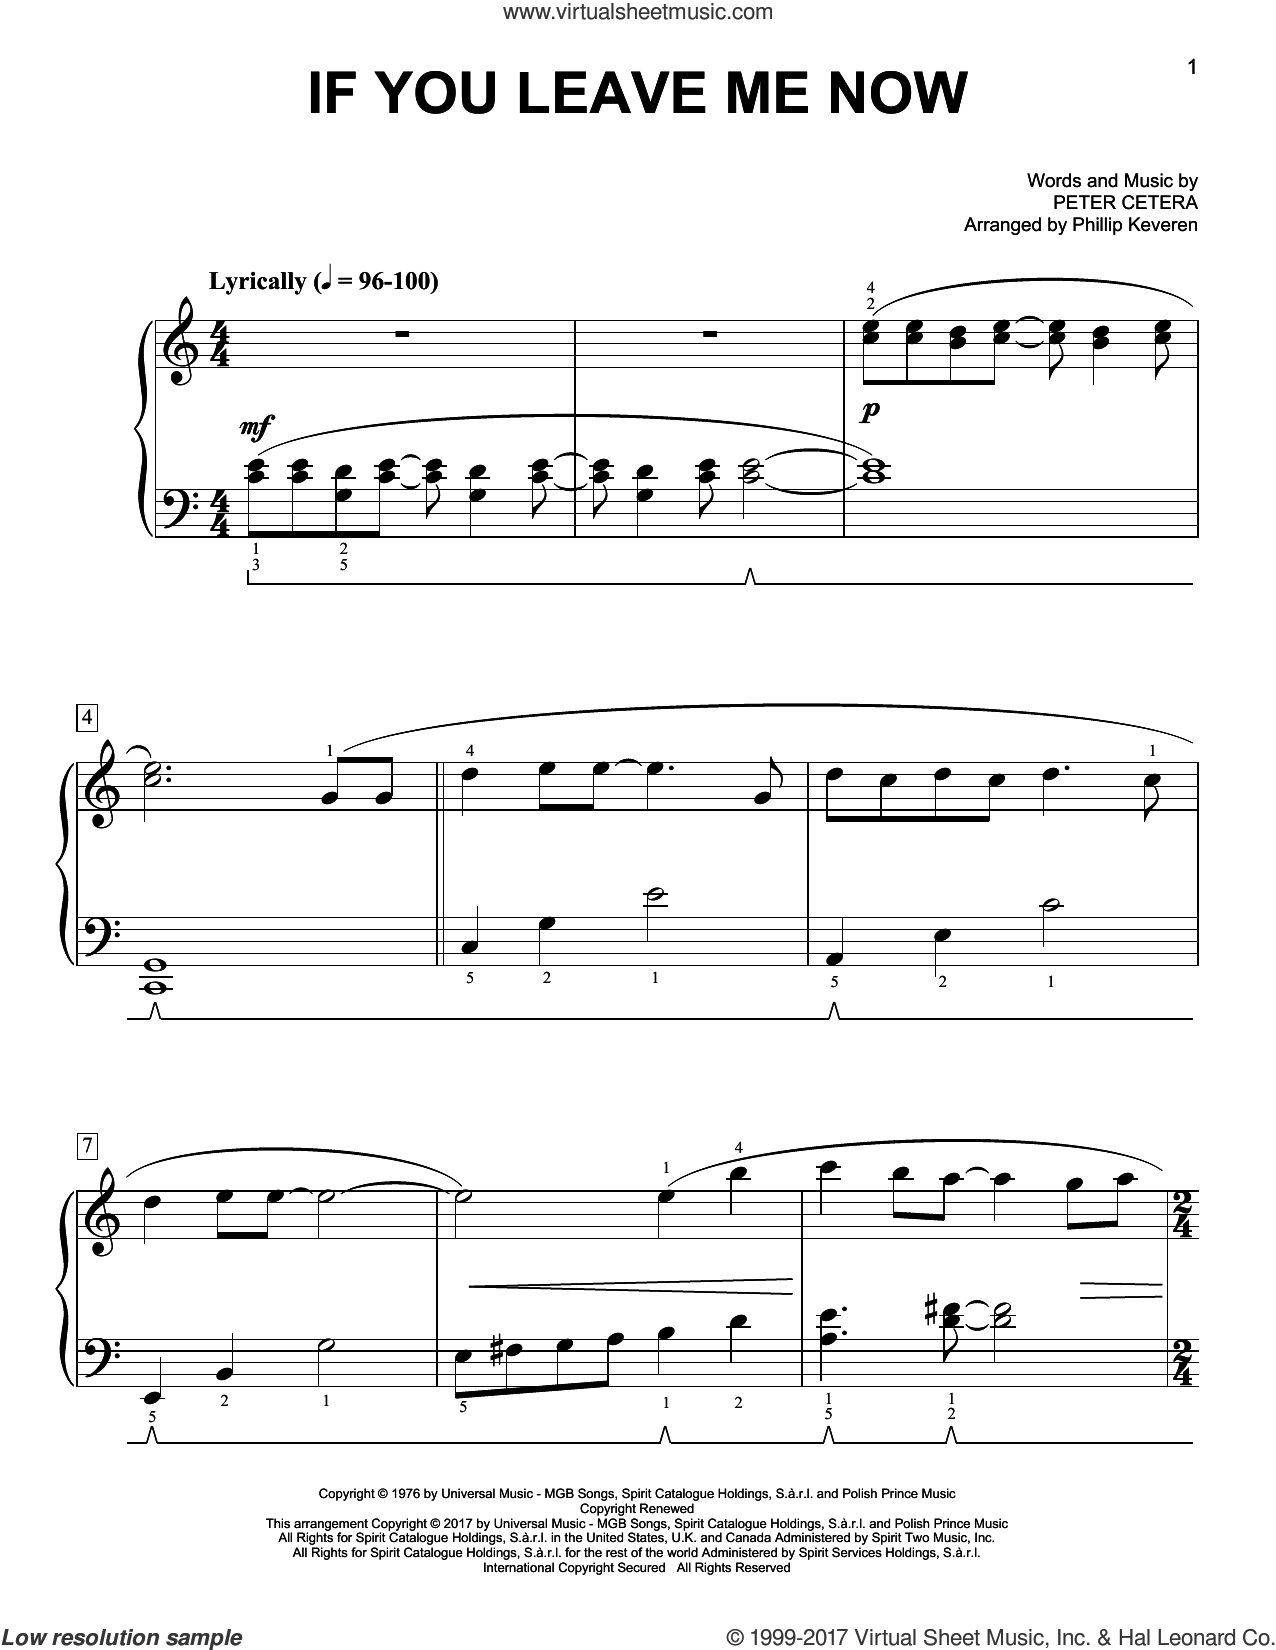 Cetera - If You Leave Me Now sheet music for piano solo PDF